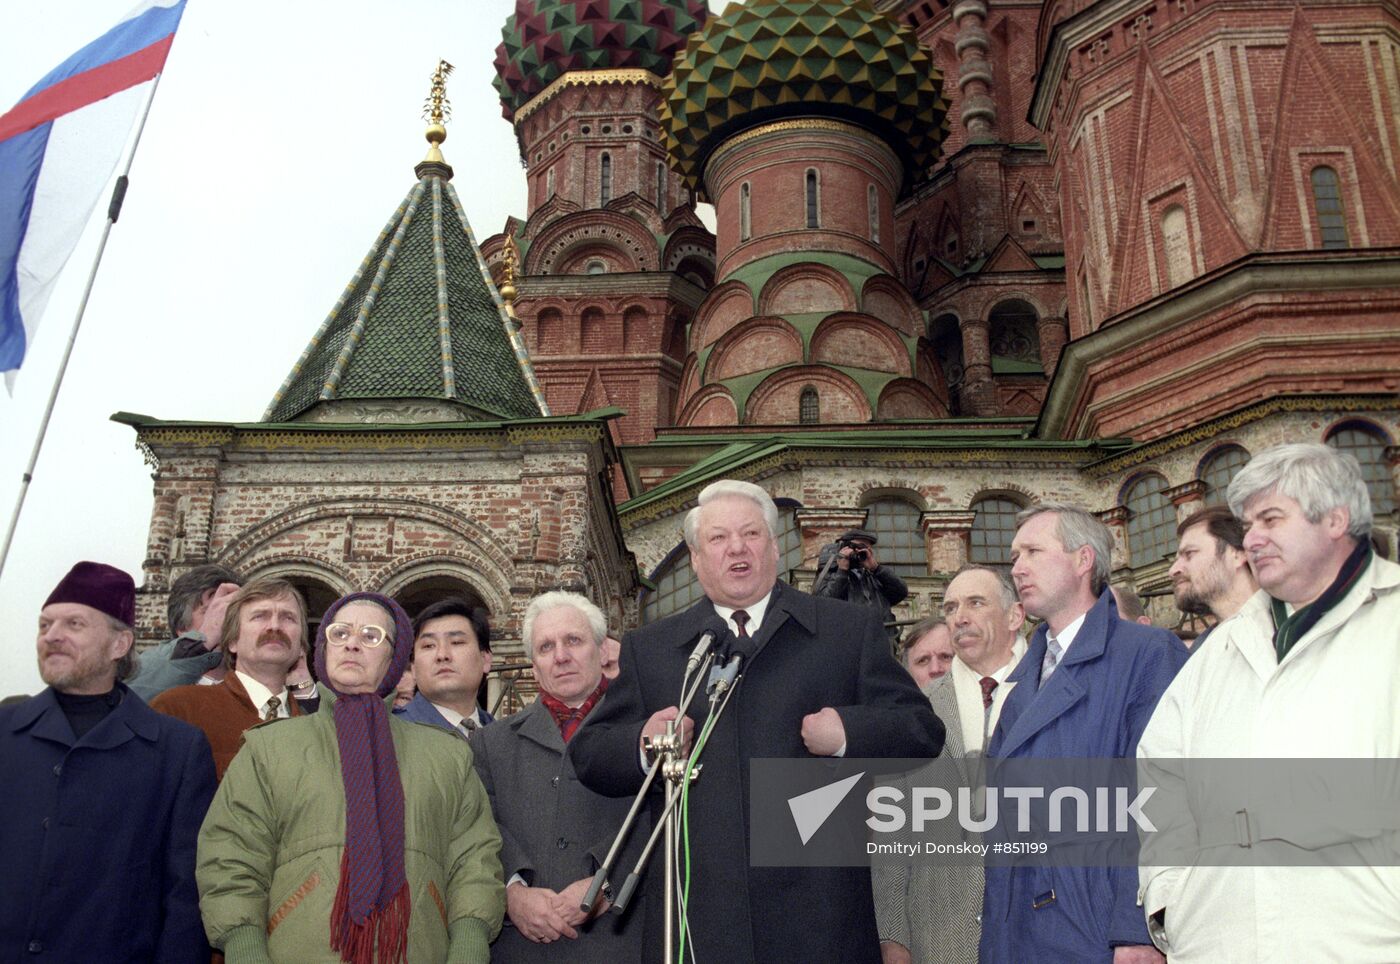 Boris Yeltsin speaking at rally on Red Square